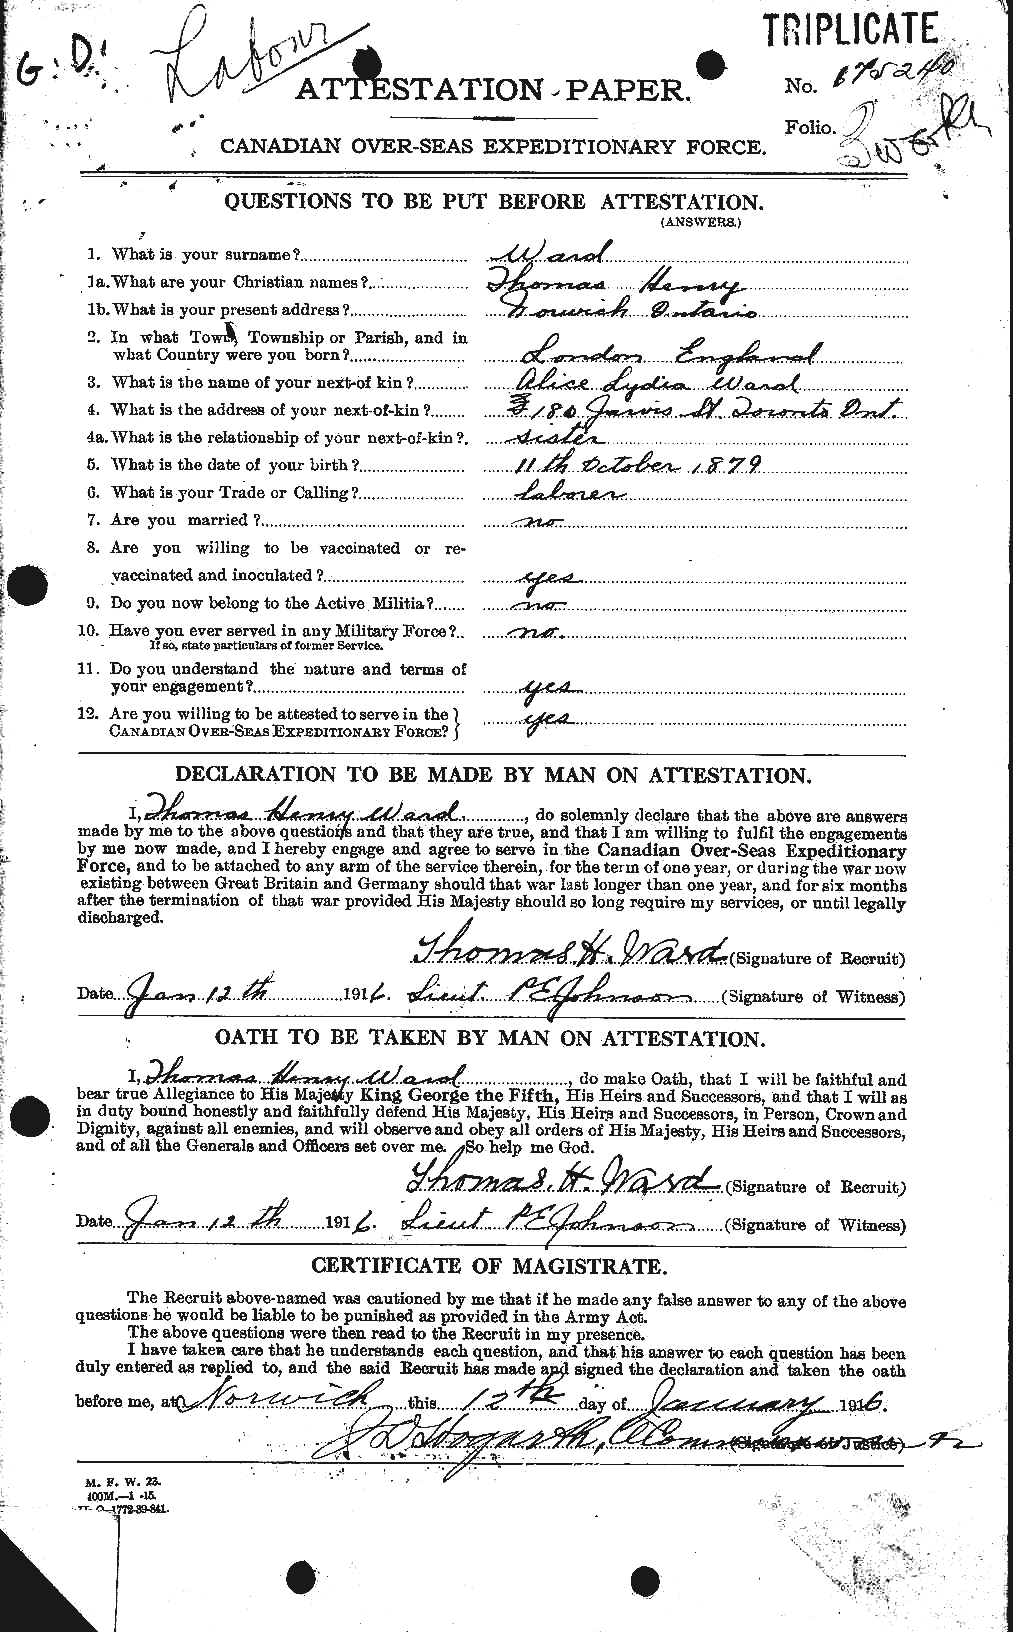 Personnel Records of the First World War - CEF 659728a